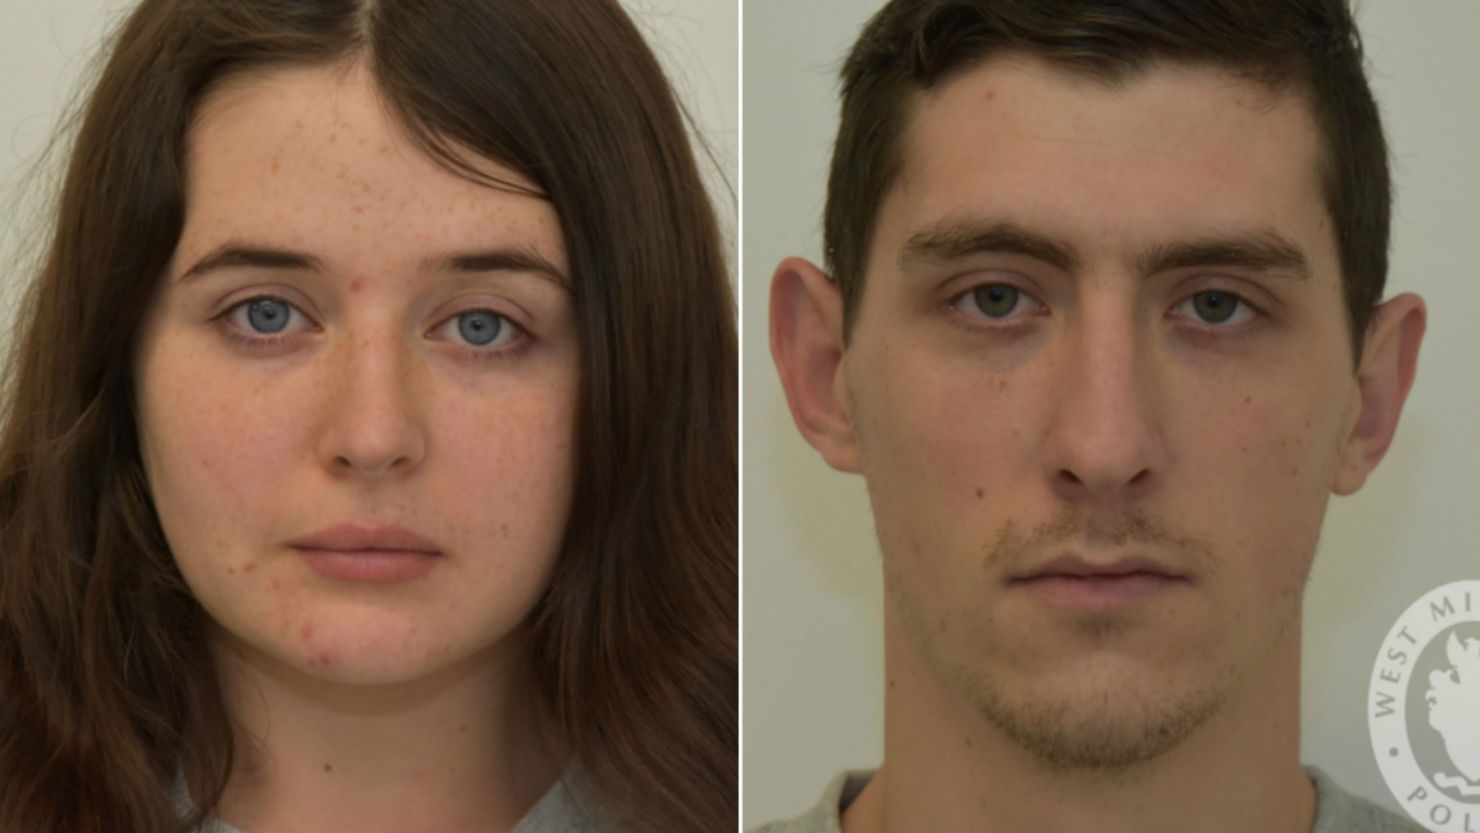  Alice Cutter and her partner Mark Jones were jailed for being members of the banned extreme right-wing neo-Nazi group National Action.